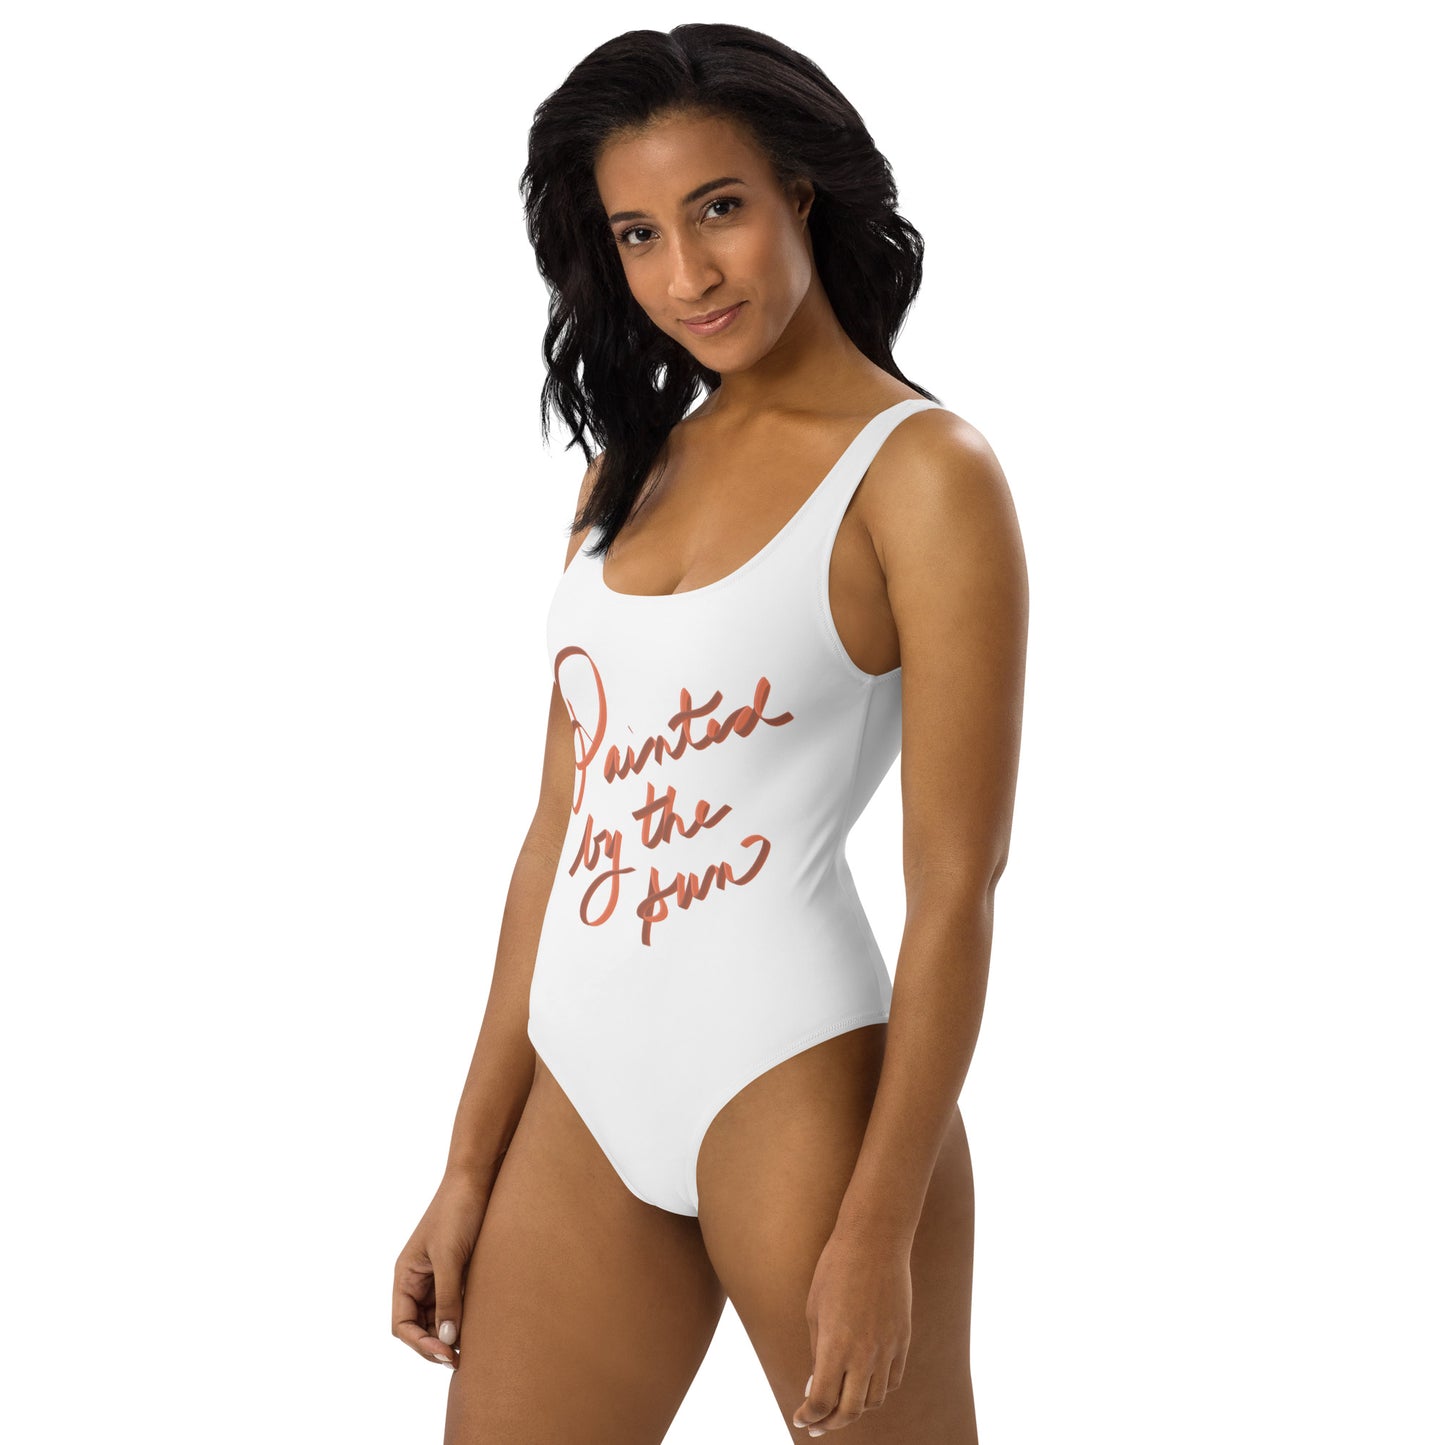 "Painted" One-Piece Swimsuit